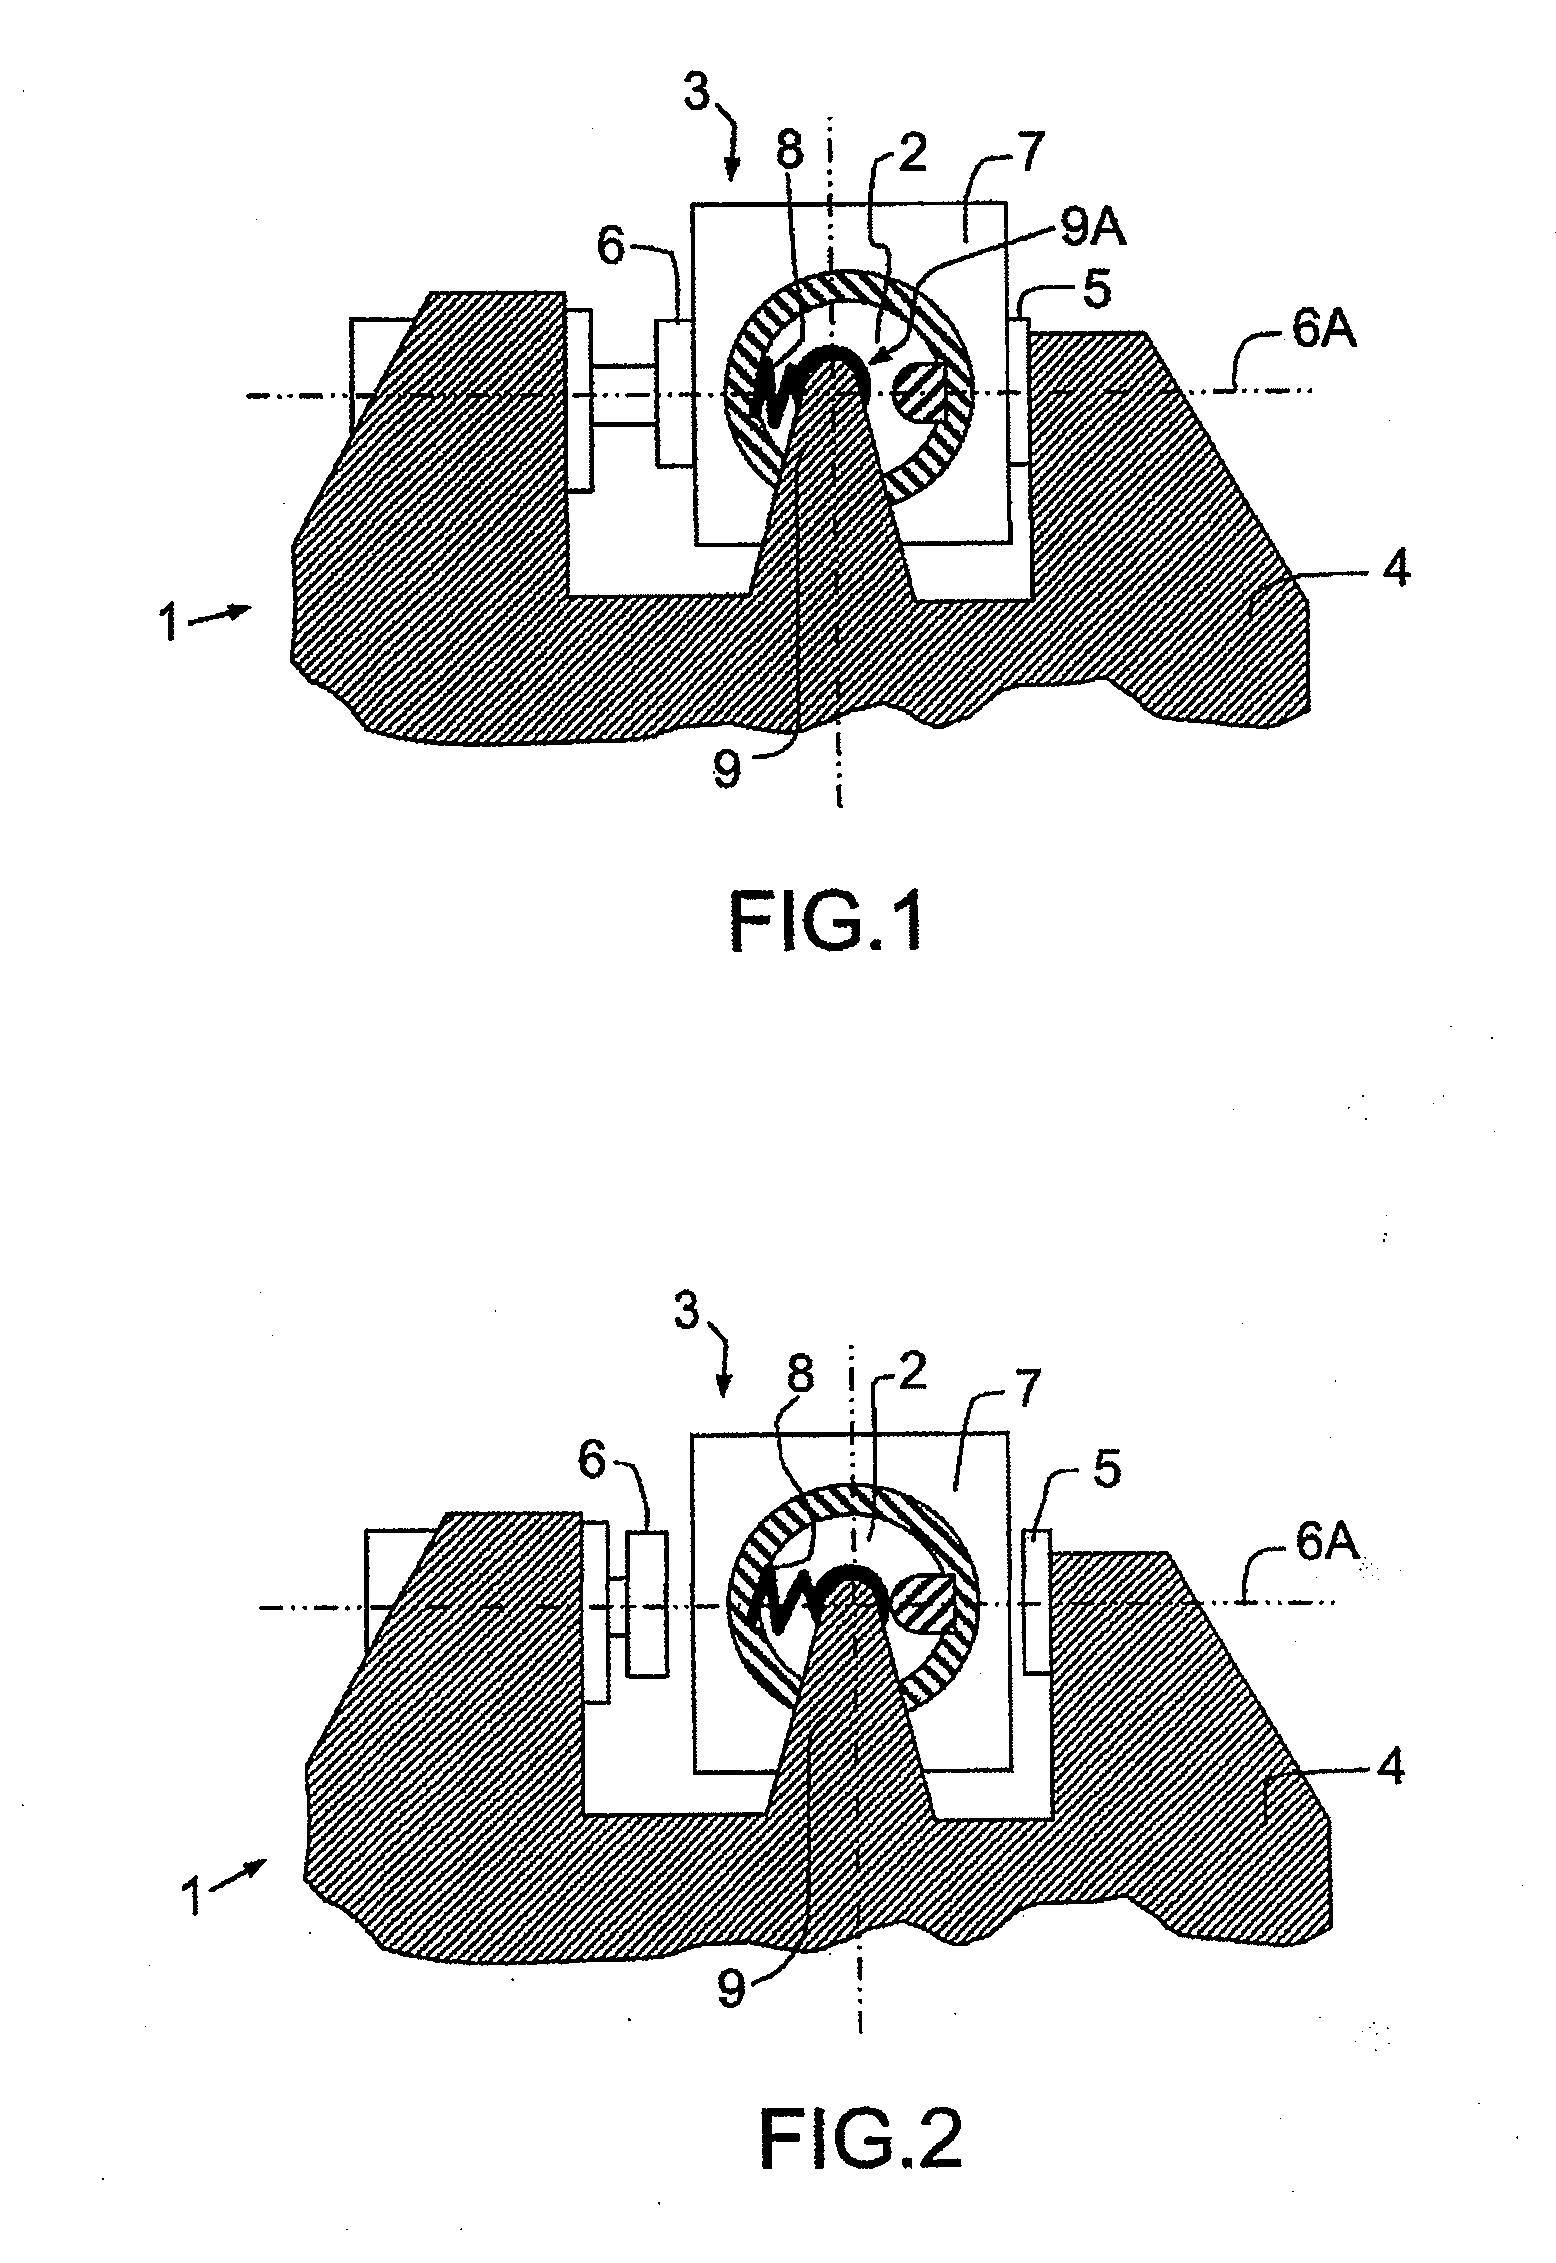 Reusable device for holding at least one moving object securely autonomously and without shocks, for spacecraft